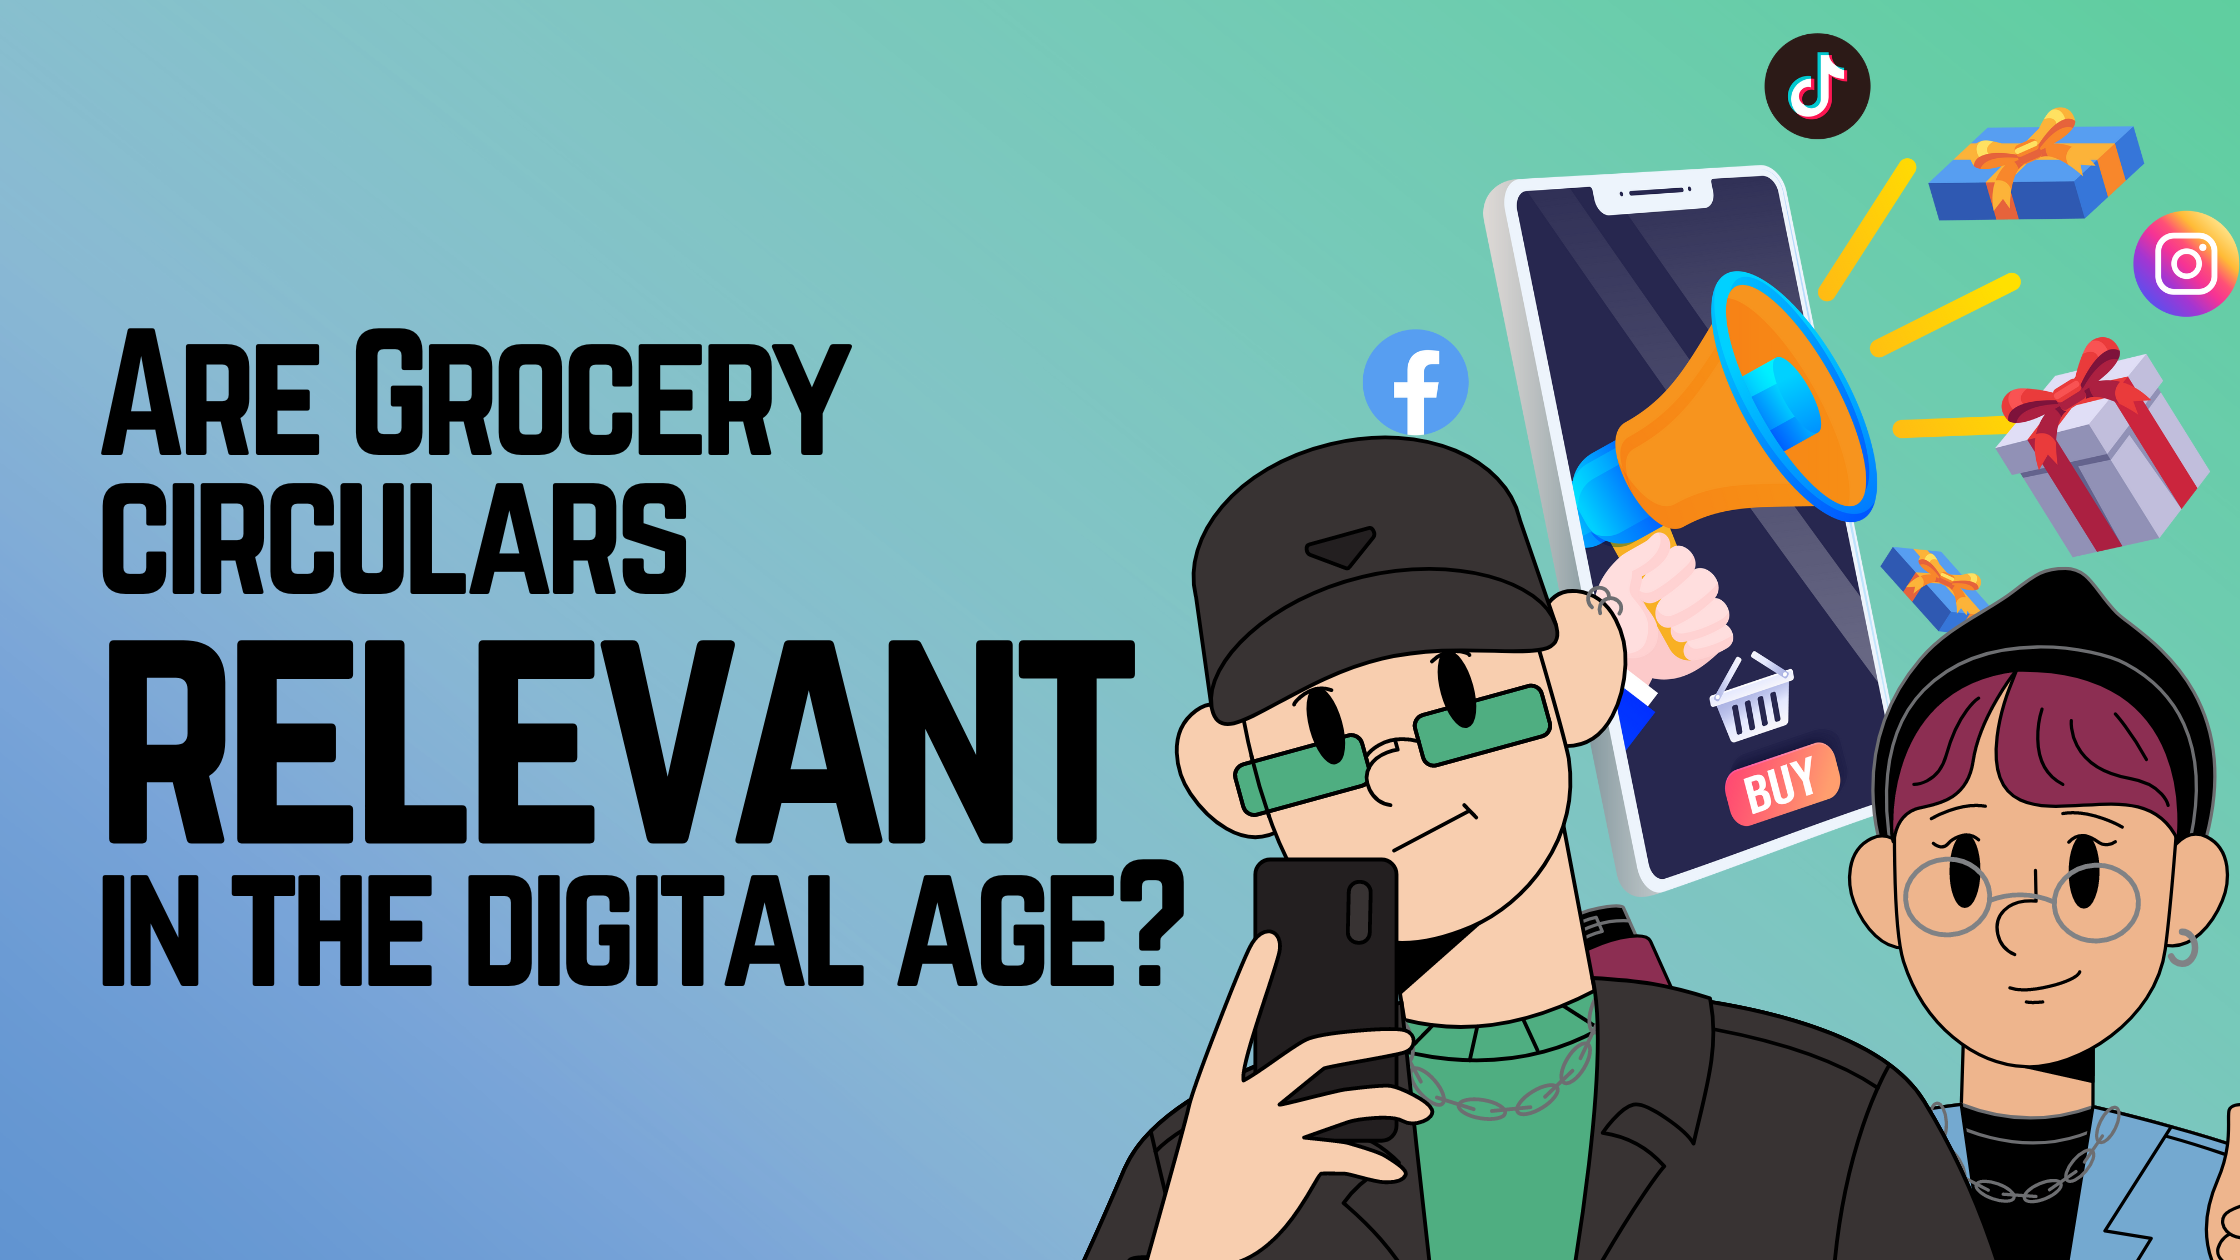 [Blog Banner Image of Young People Looking at their phones. A cellphone with a megaphone blasting advertisements, gifts, and social media icons is in the background] Text Reads: Are Grocery Circular Relevant in the Digital Age